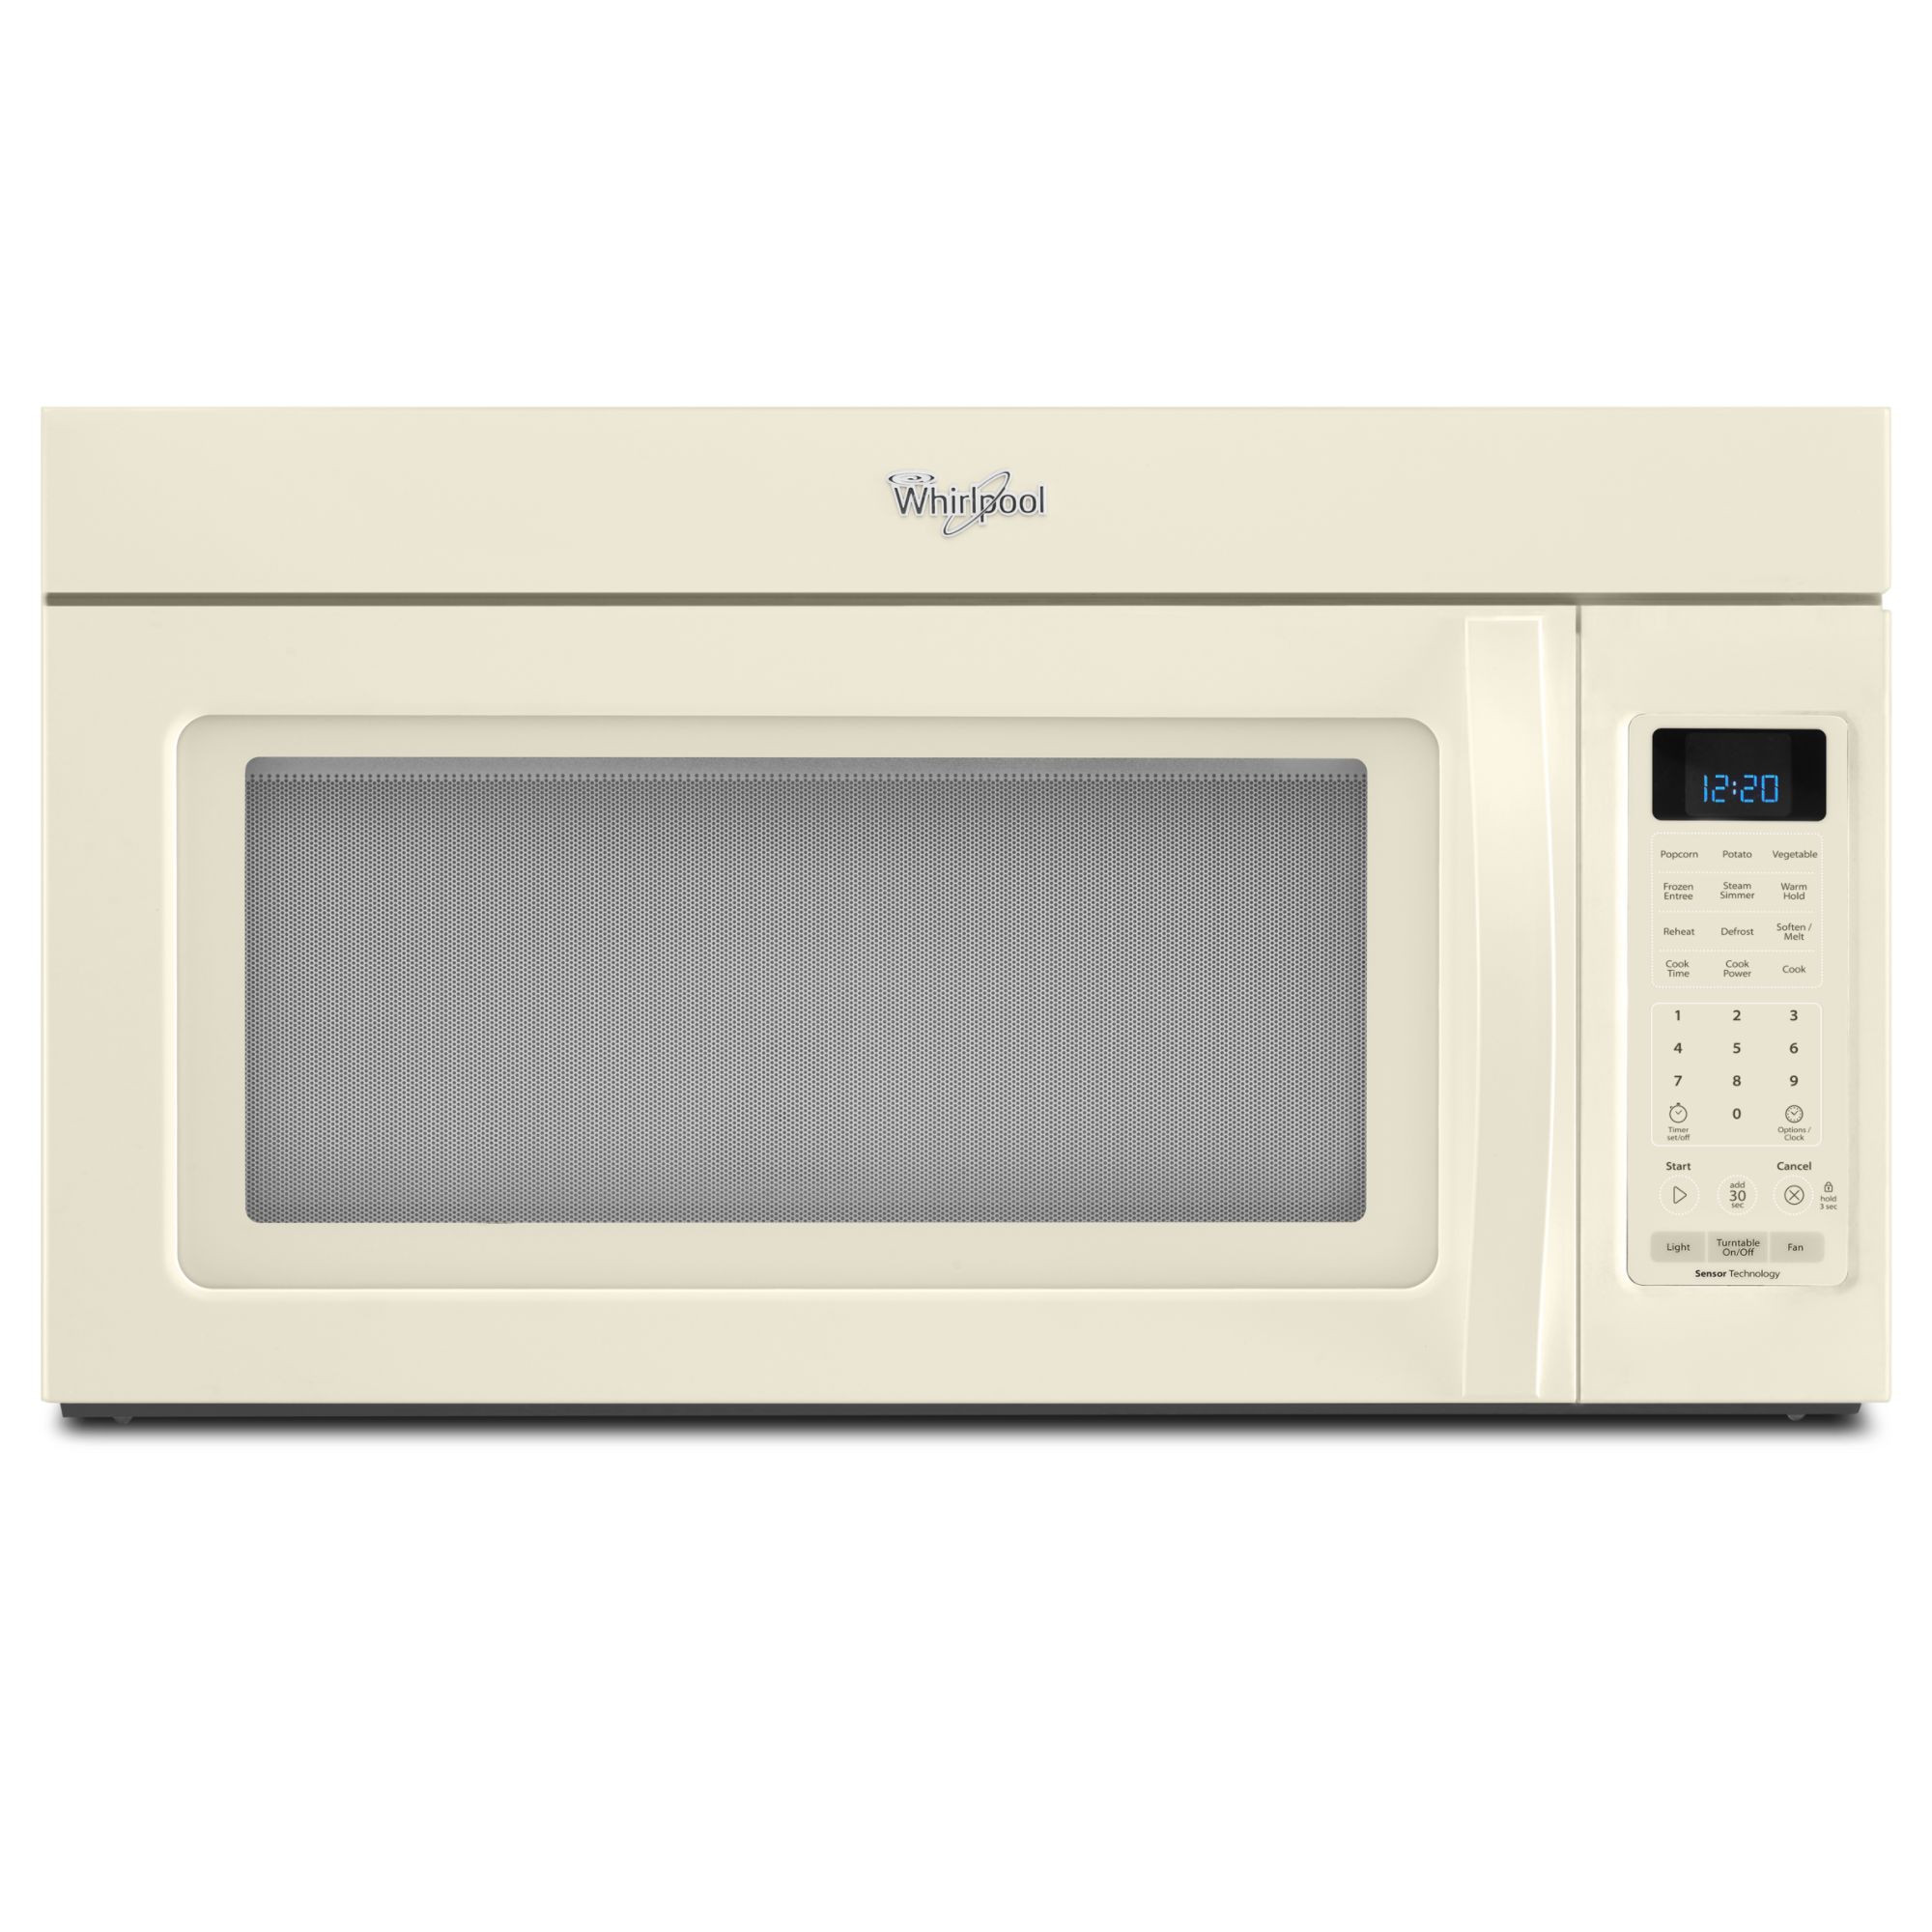 Over The Range Microwave Bisque
 Whirlpool WMH AT 30 in Over the Range Microwave w